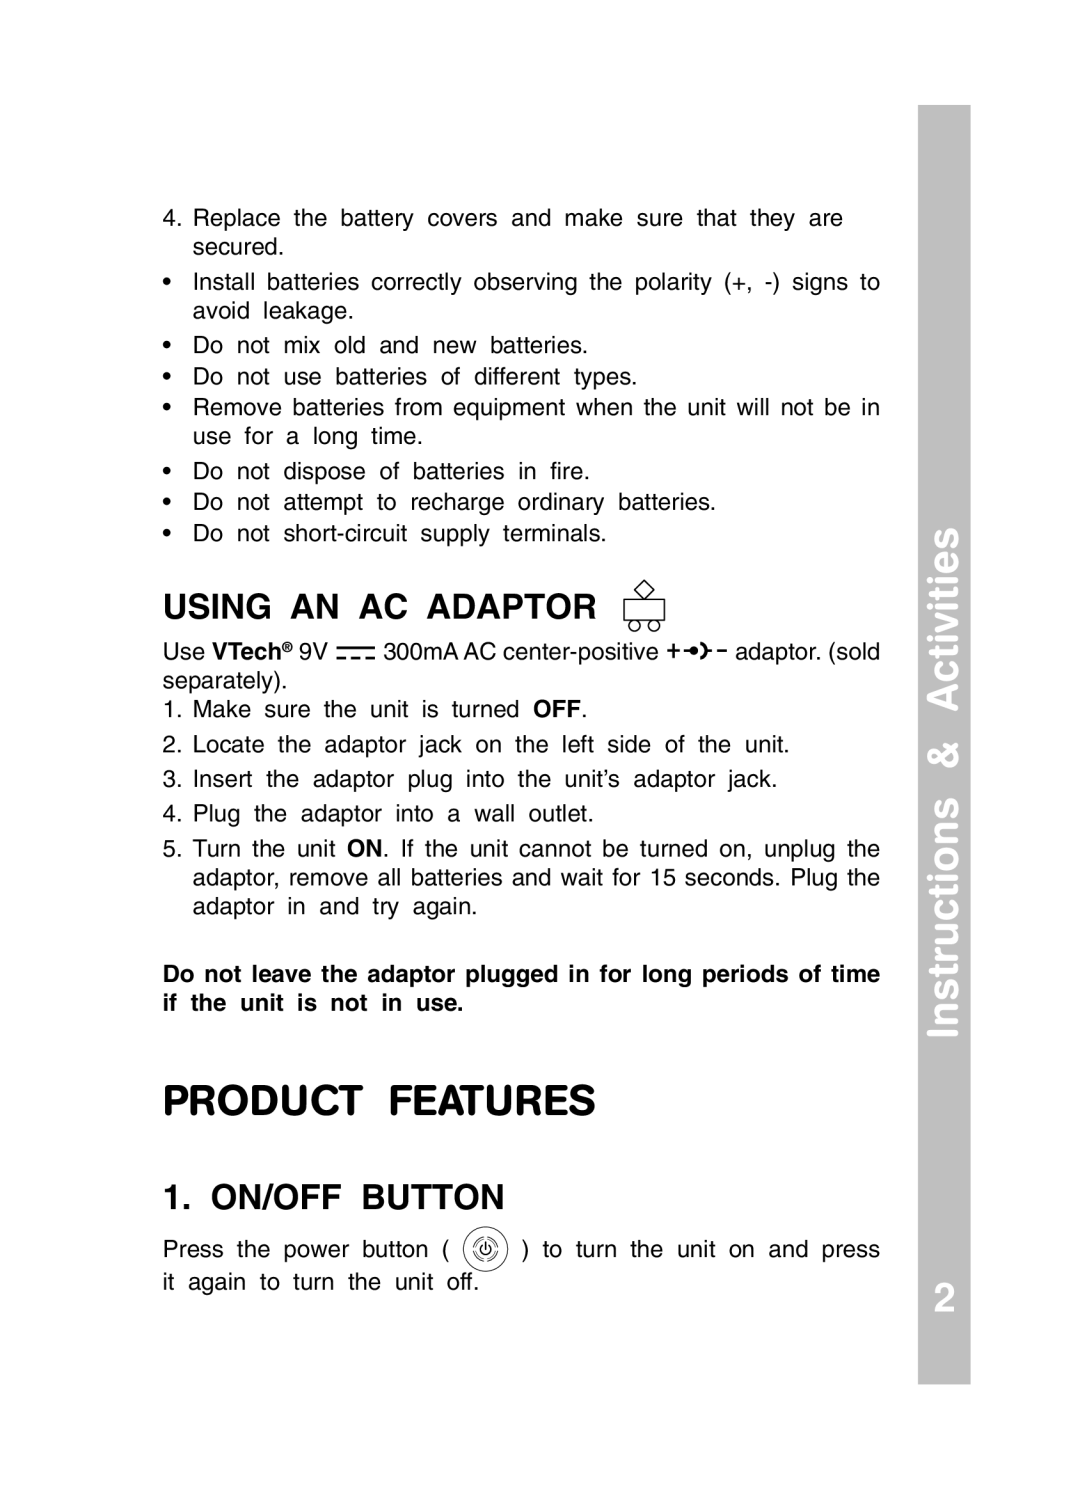 VTech 91-01256-043 user manual Product Features, Instructions & Activities, Using An Ac Adaptor, 1. ON/OFF BUTTON 